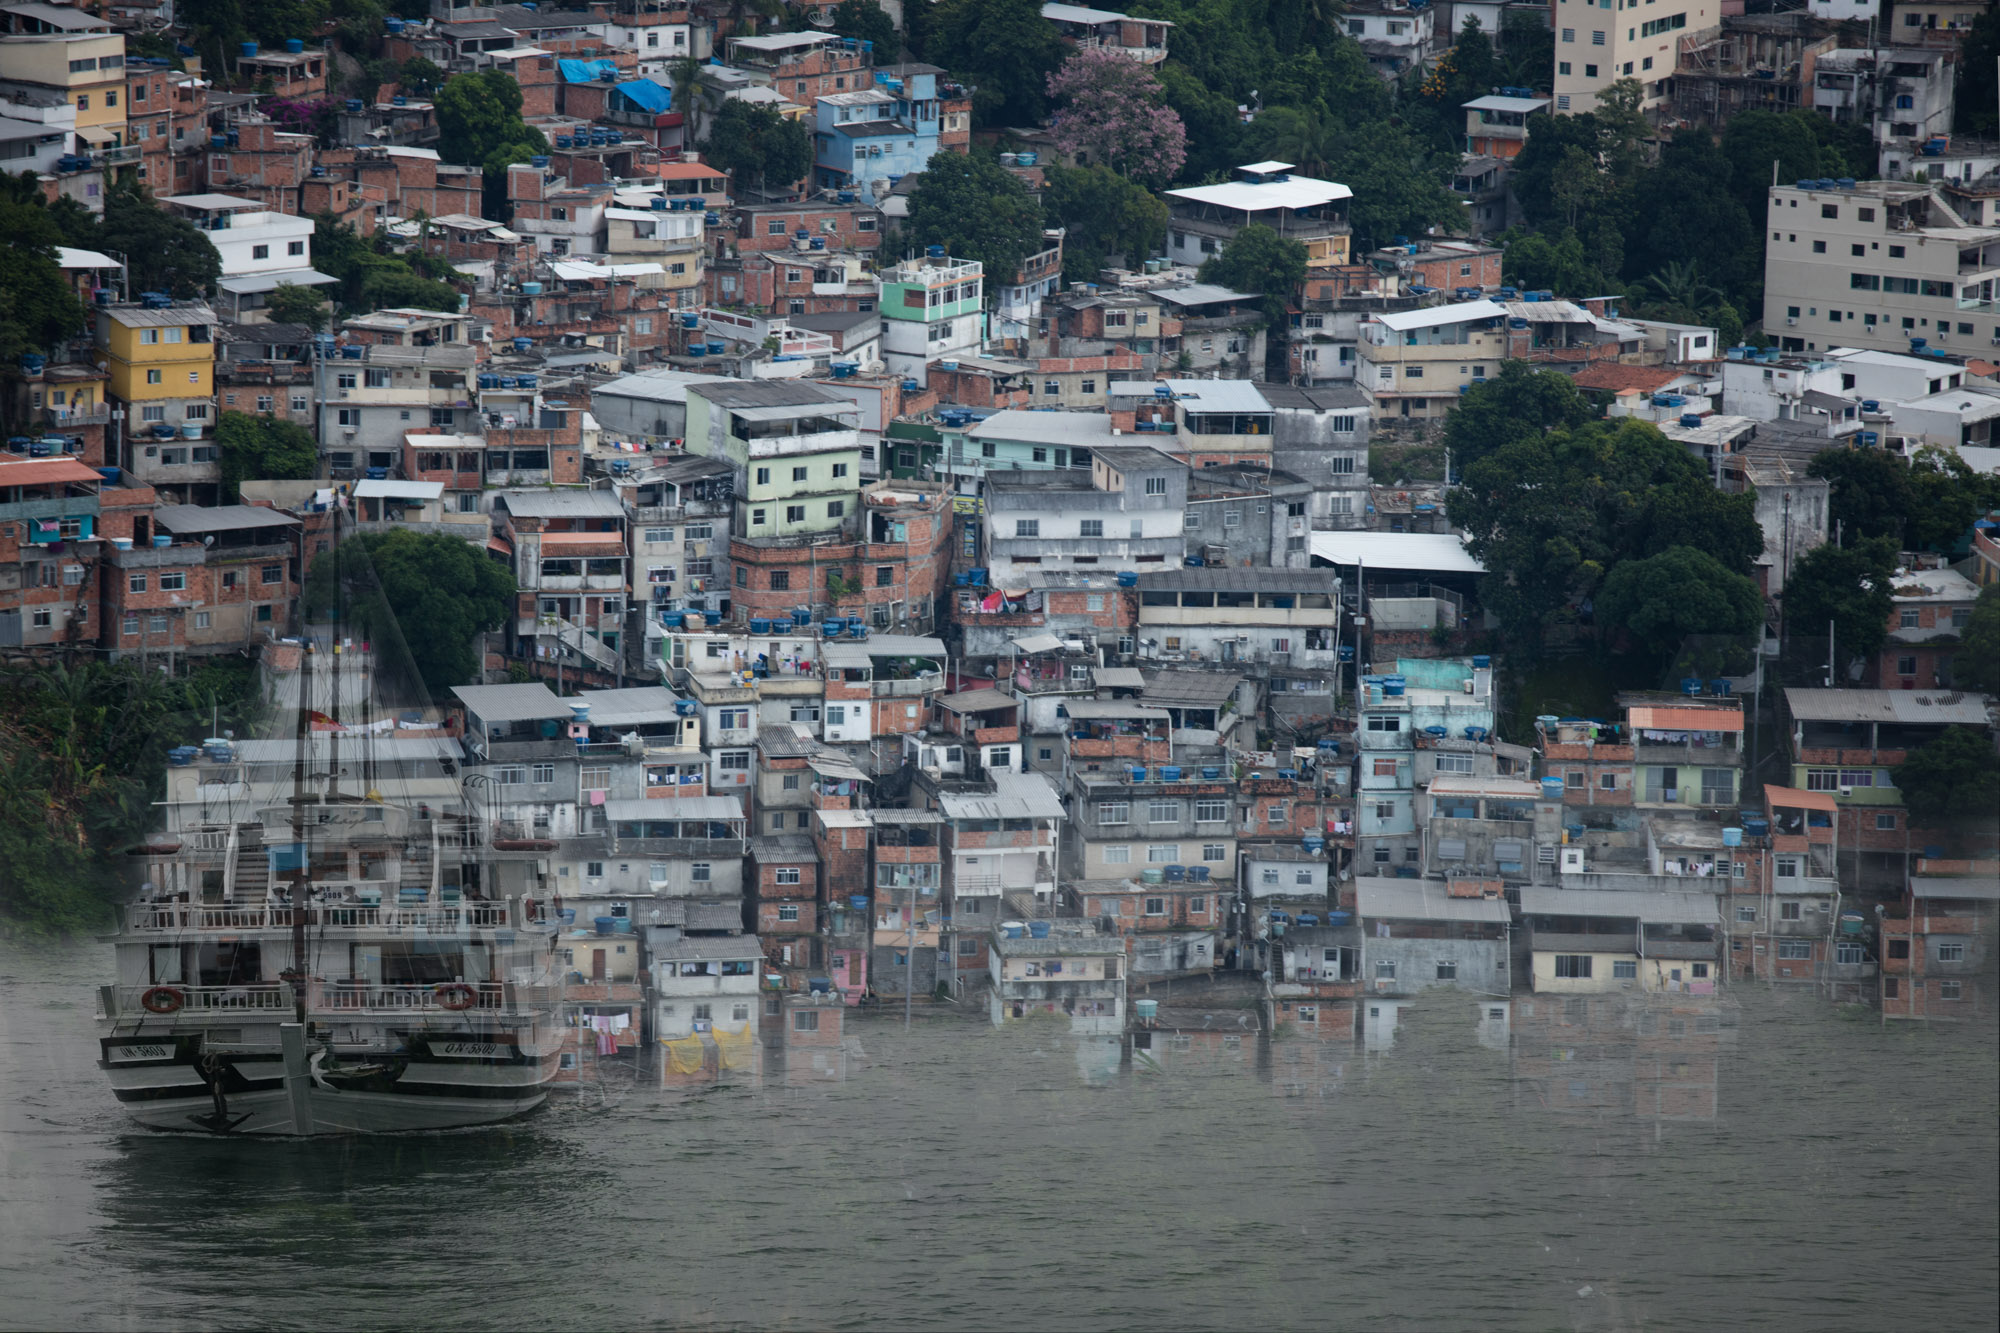 The favela and the boat